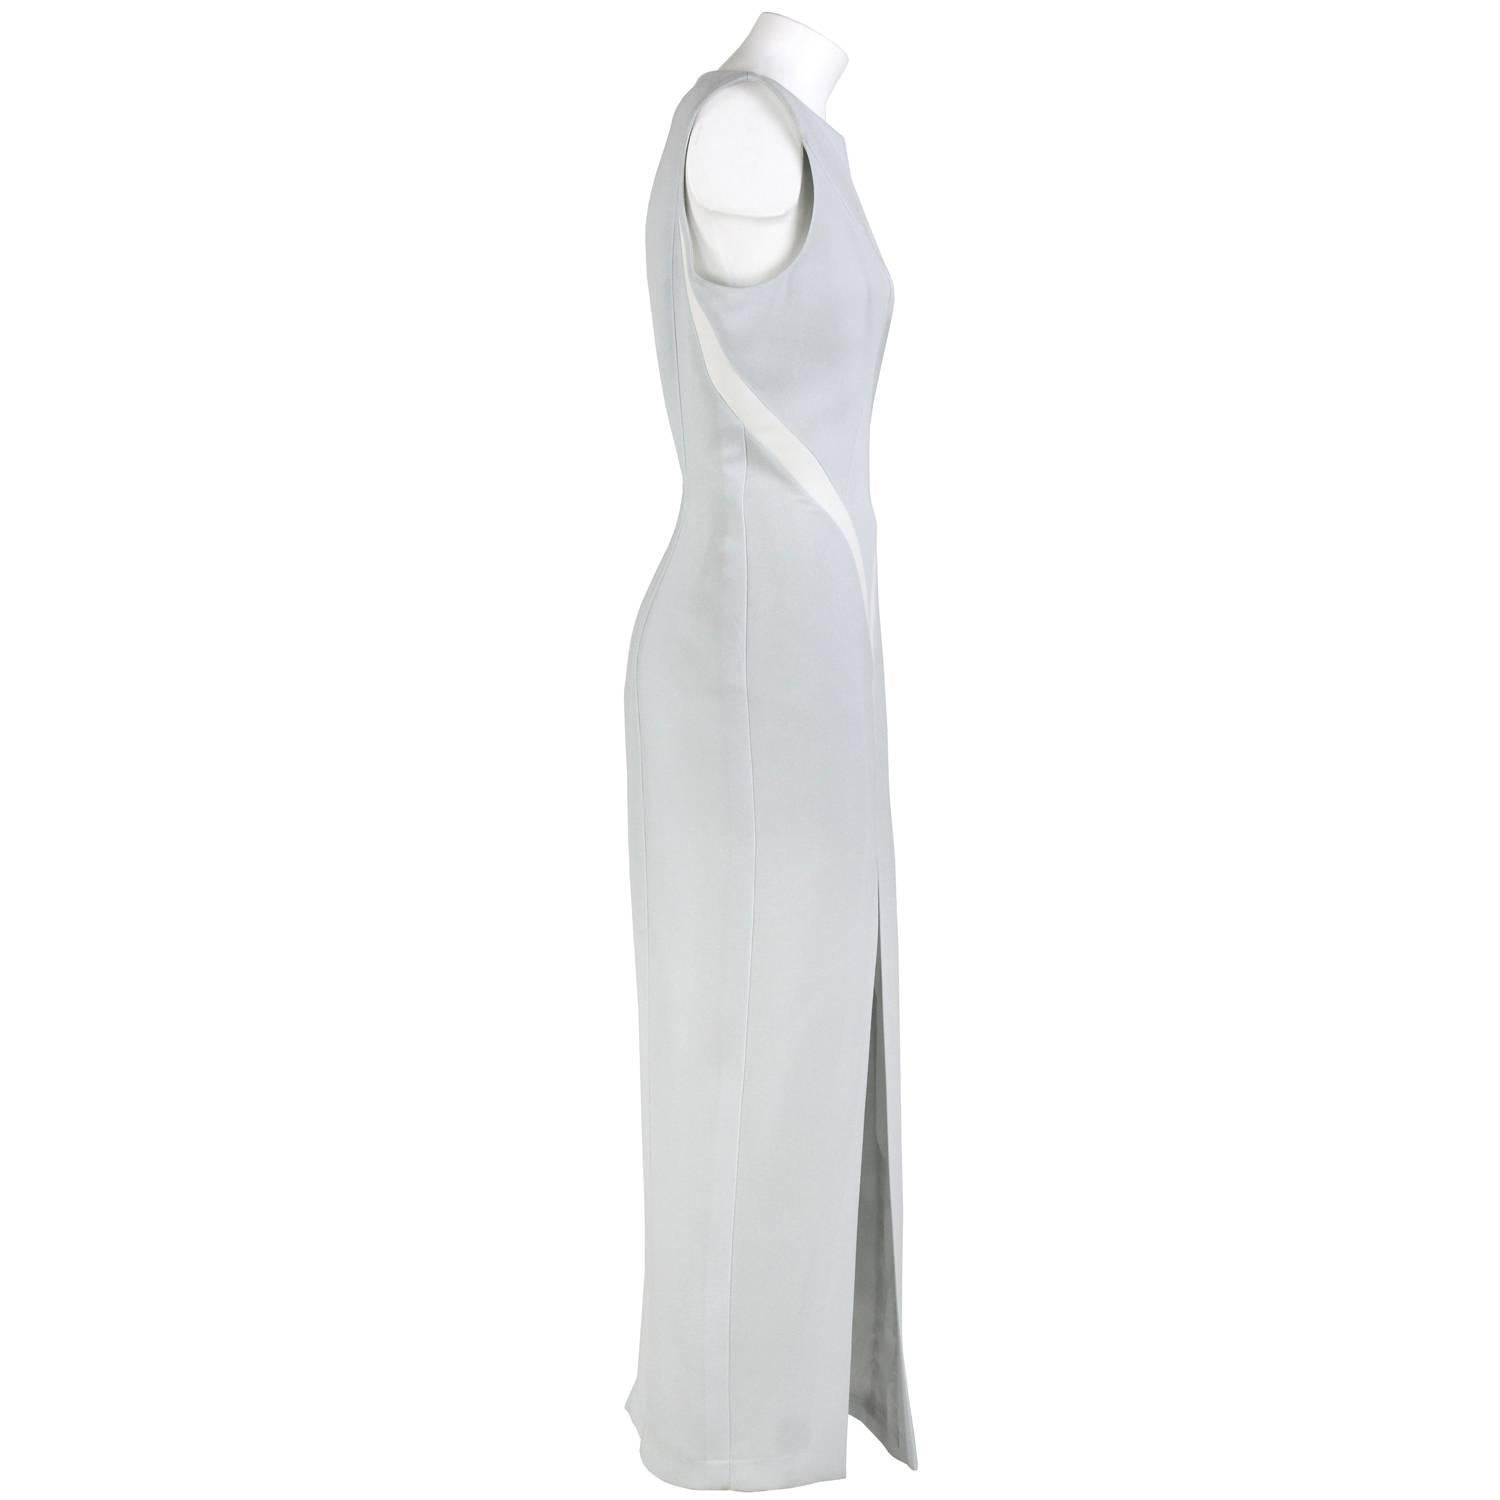 Splendid Thierry Mugler wedding dress in a baby blue fabric. It features a V shape insert in white fabric and a deep slit on the right side. Zip closure on the back. The item is vintage, it was produced in the 90s and is in very good